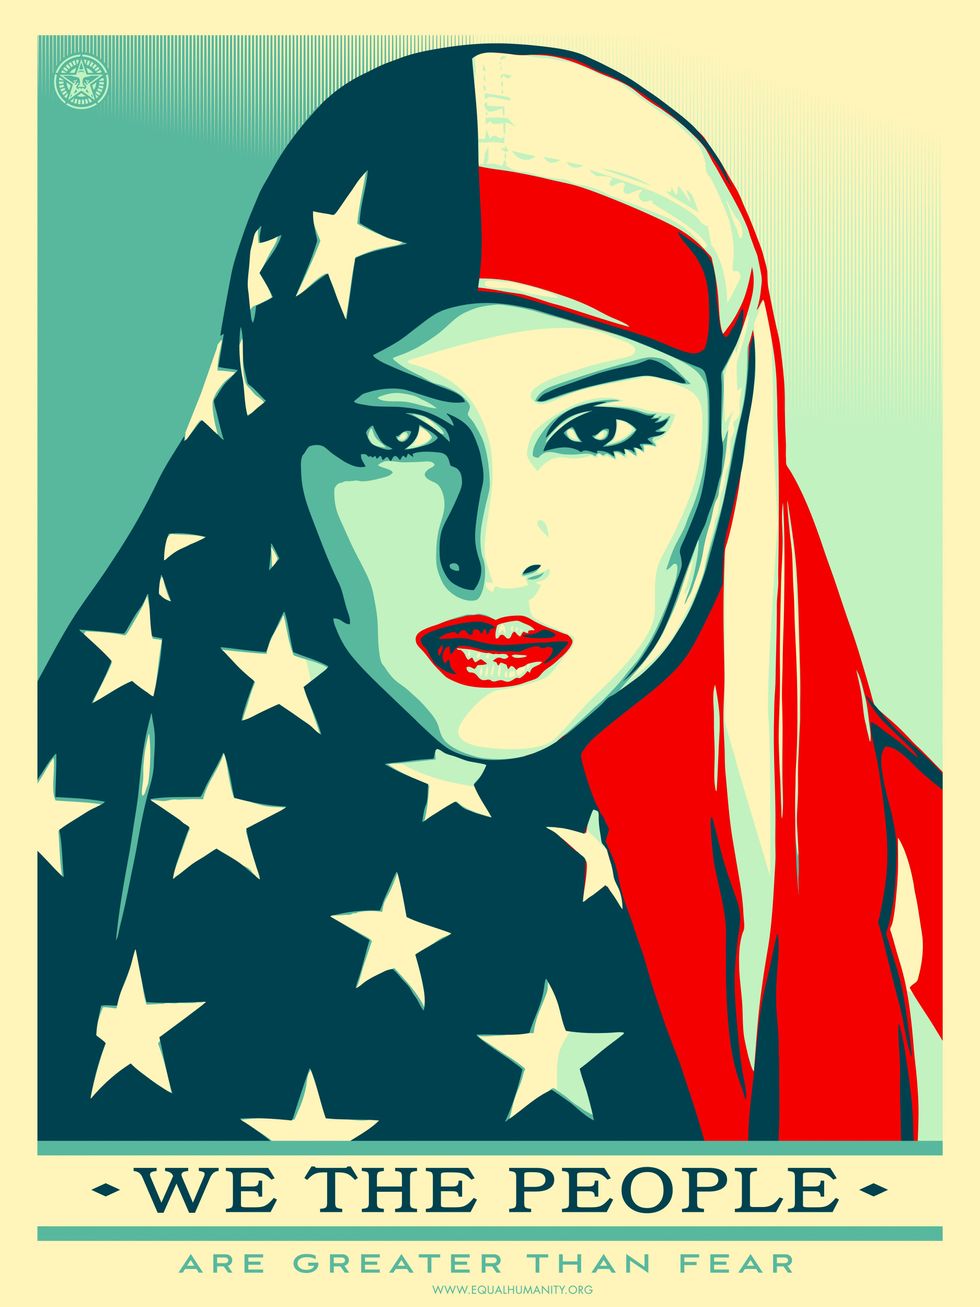 We The People - Shepard Fairey, "Greater Than Fear"